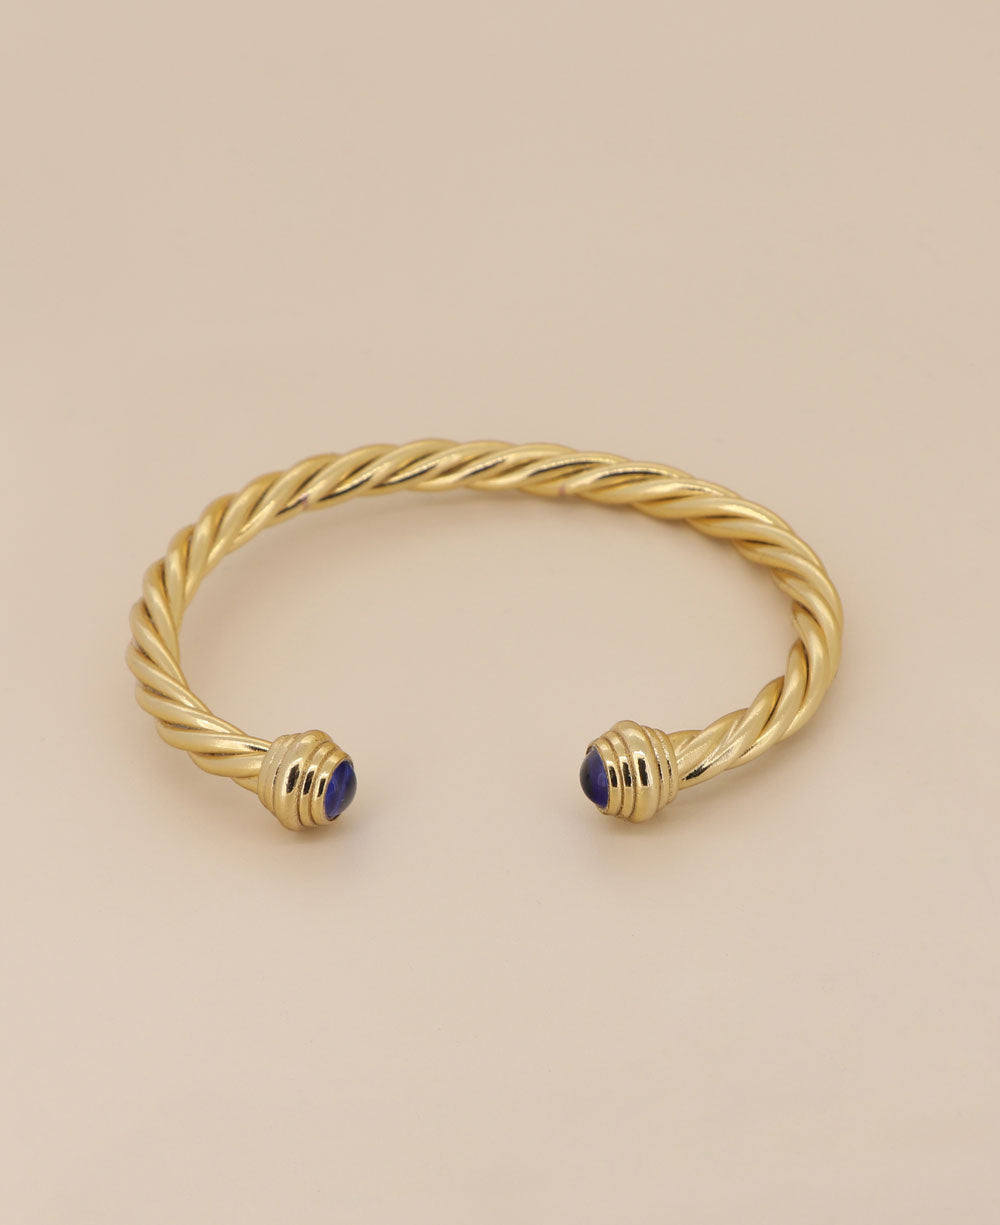 Gold Plated Brass Twisted Rope Adjustable Bracelet with dual stone accents